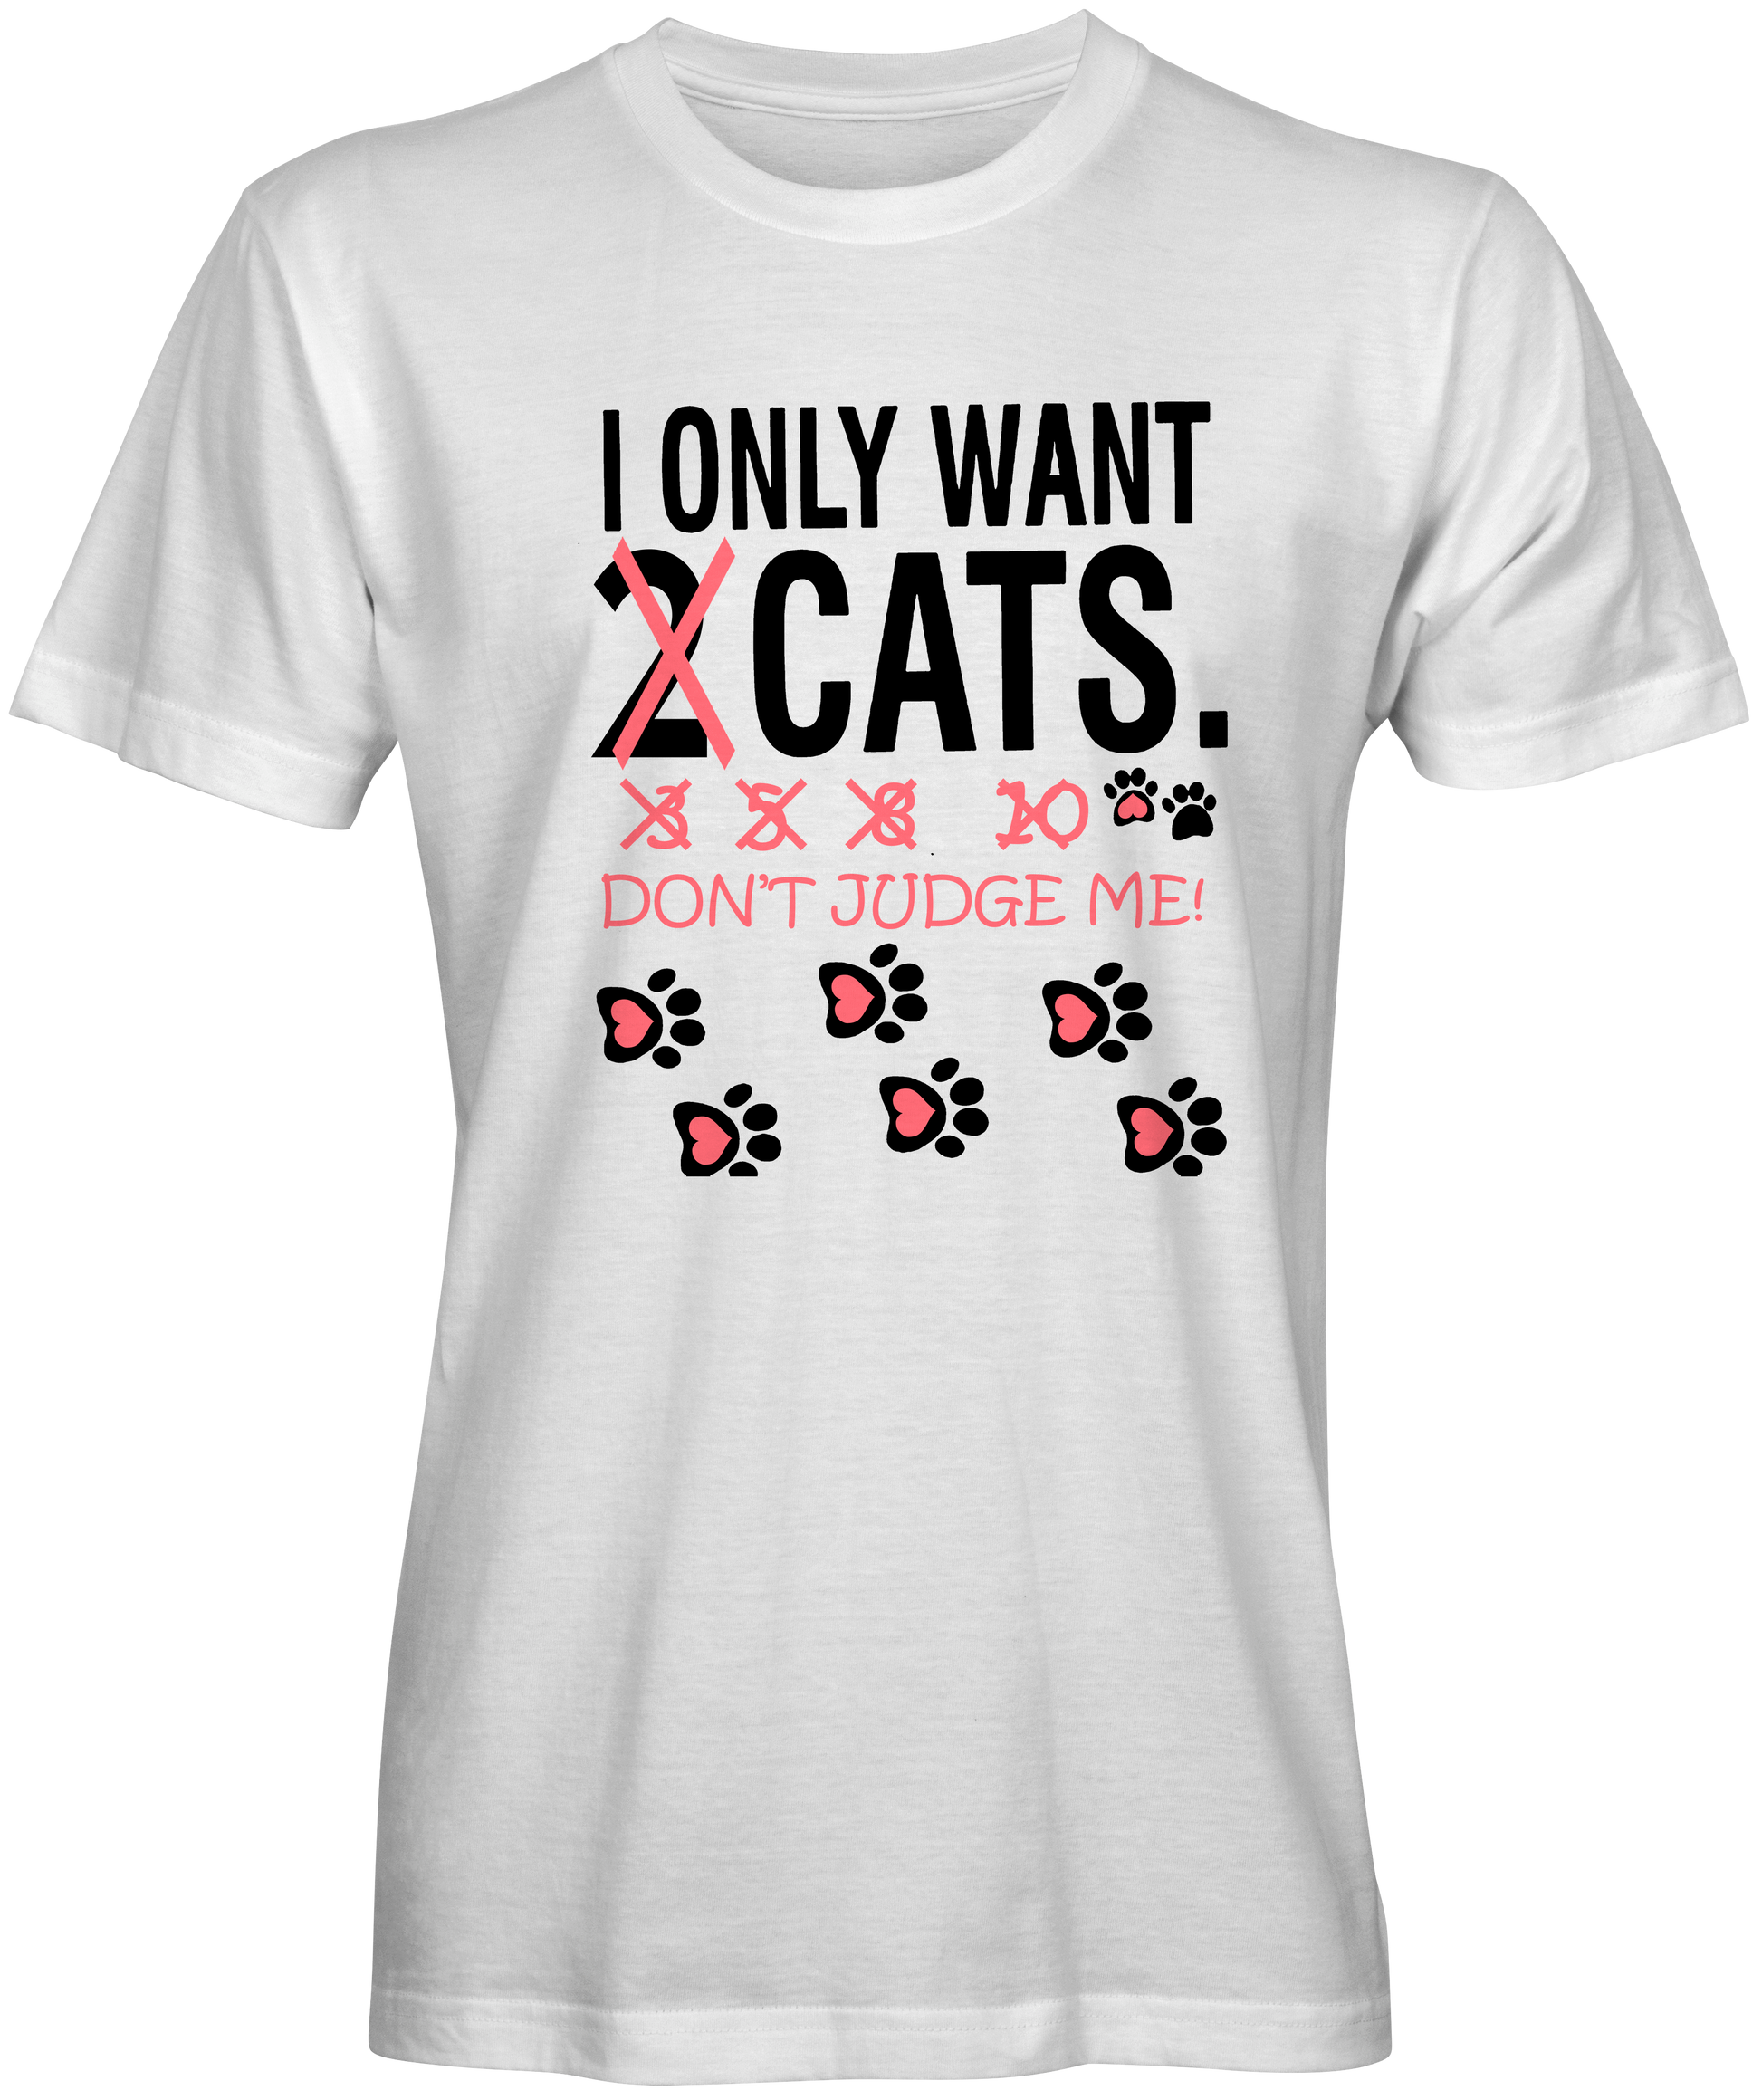 I Only Want 2 Cats Slogan Tee 